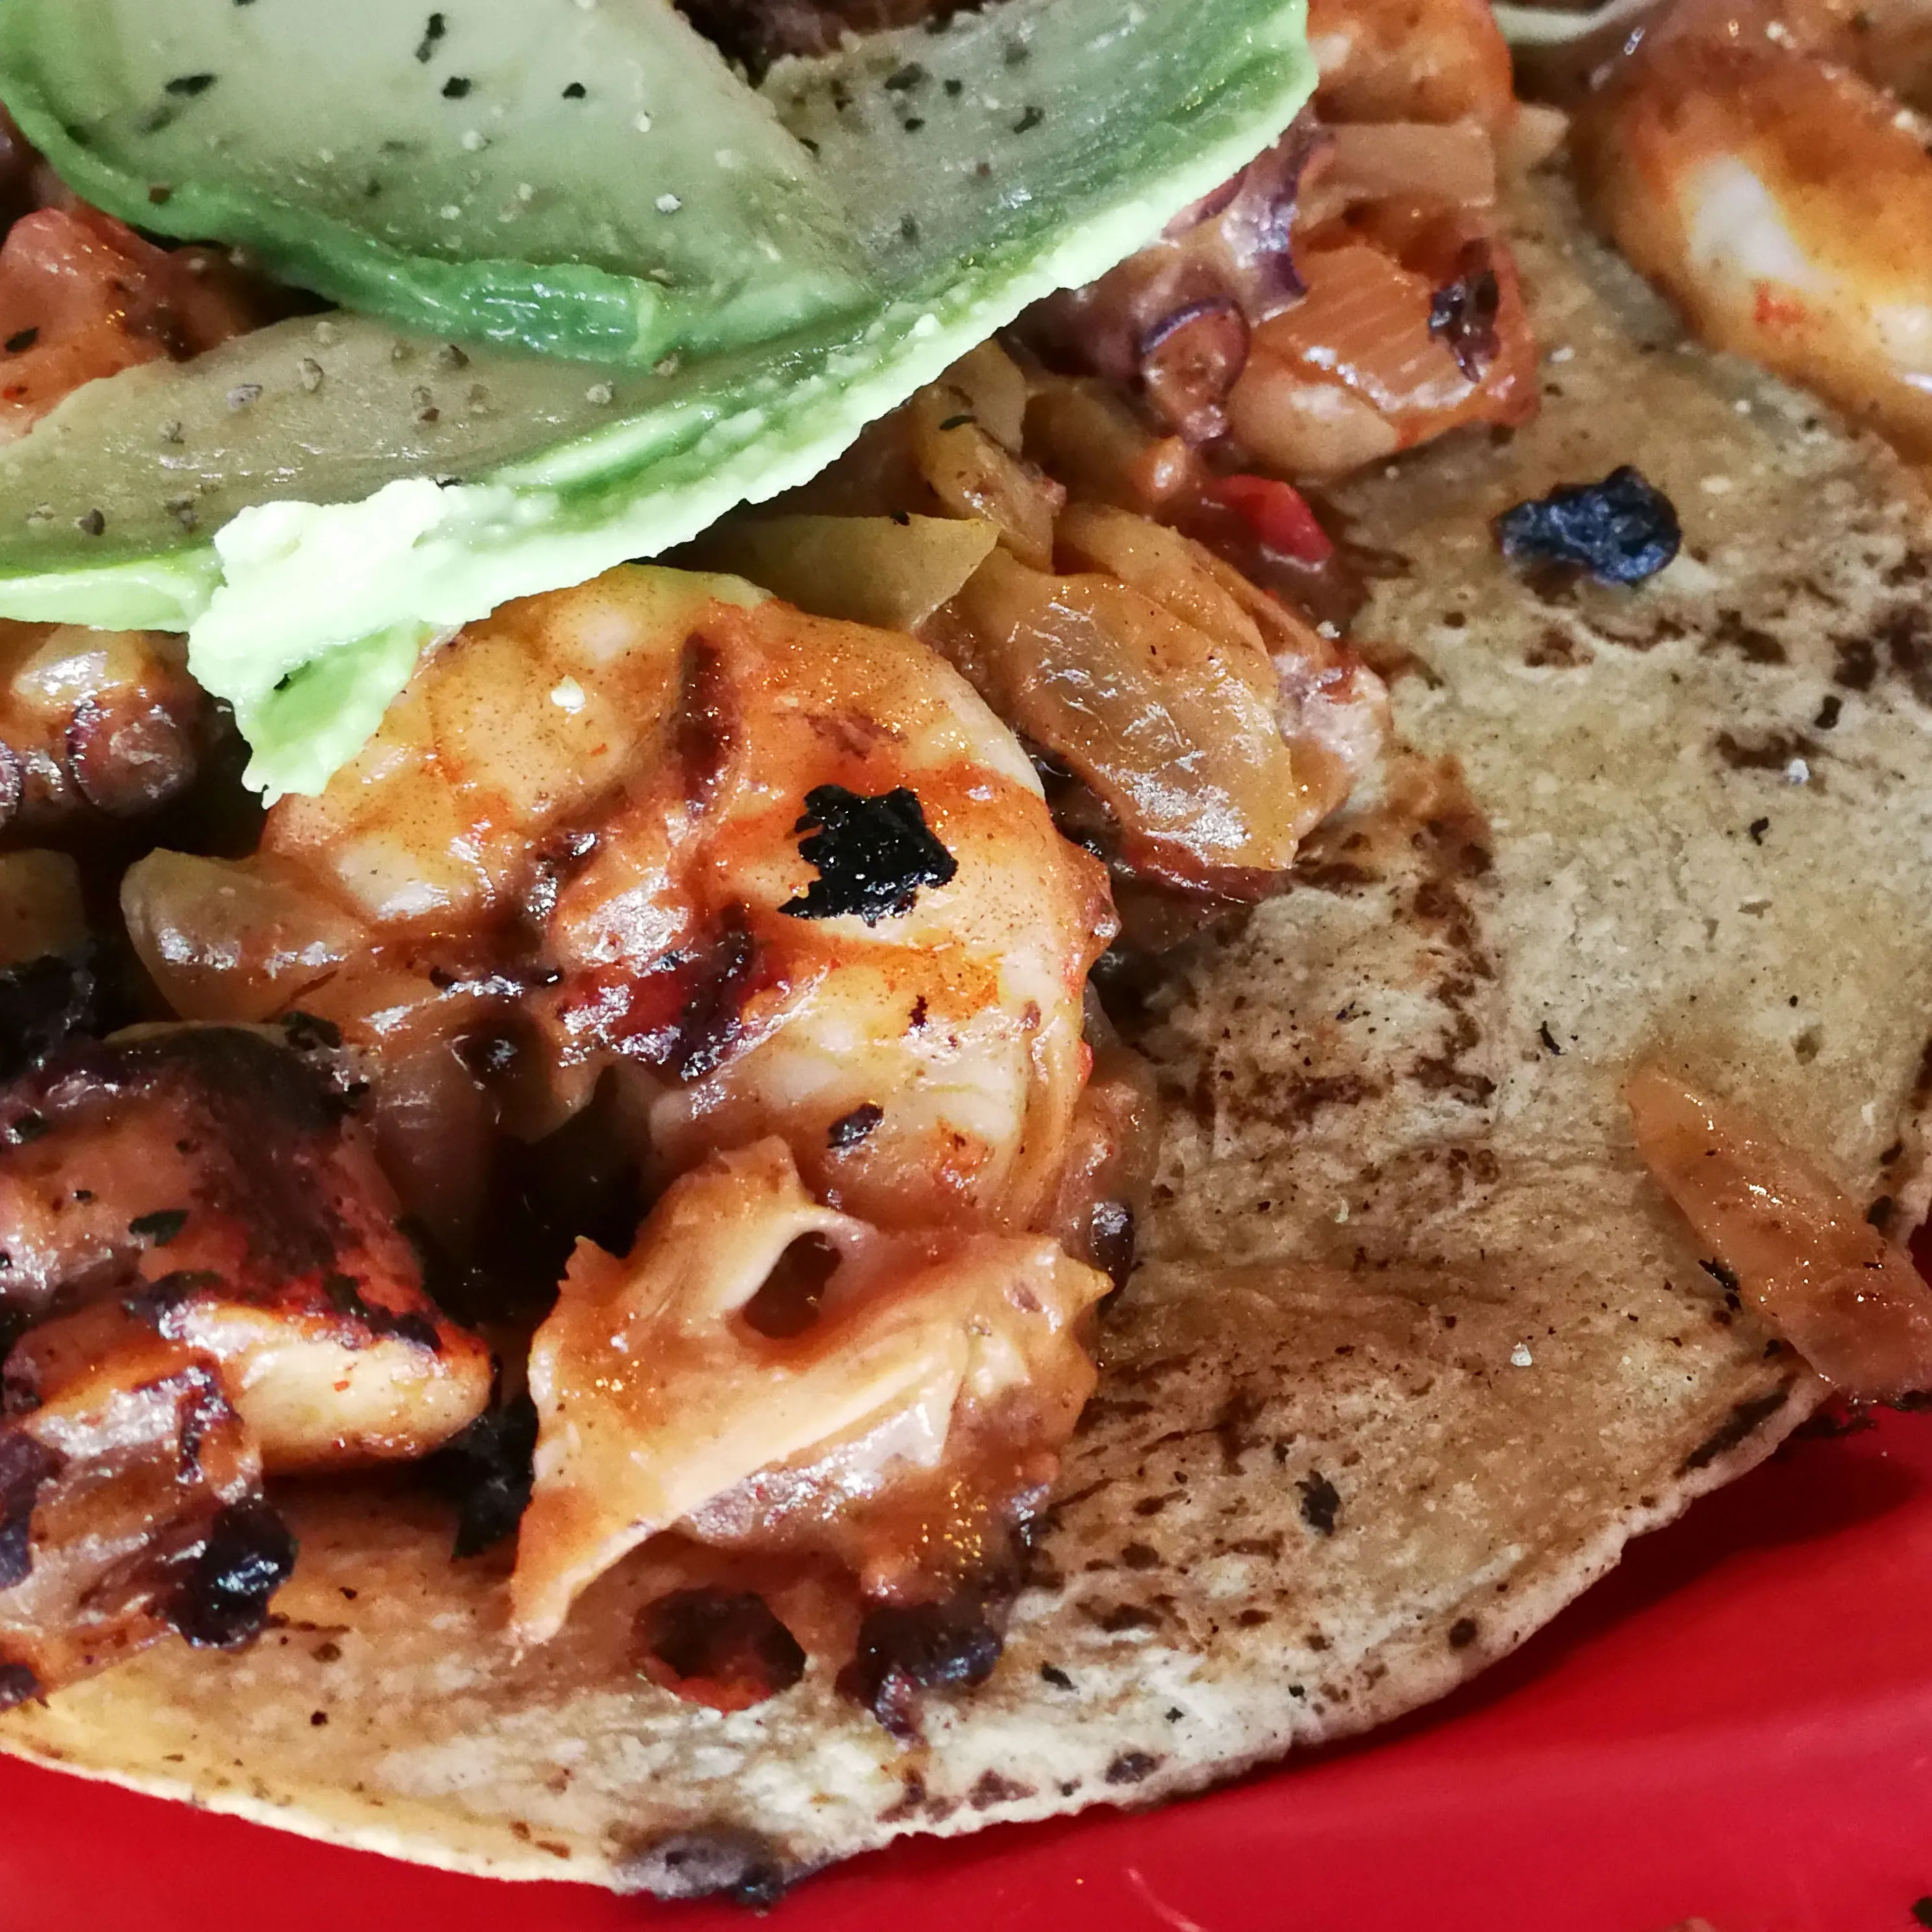 Peladito’s shrimp taco is shrimp, grilled in a hot salsa, with avocado and lime on a hot corn tortilla is simply a truly heavenly combination.